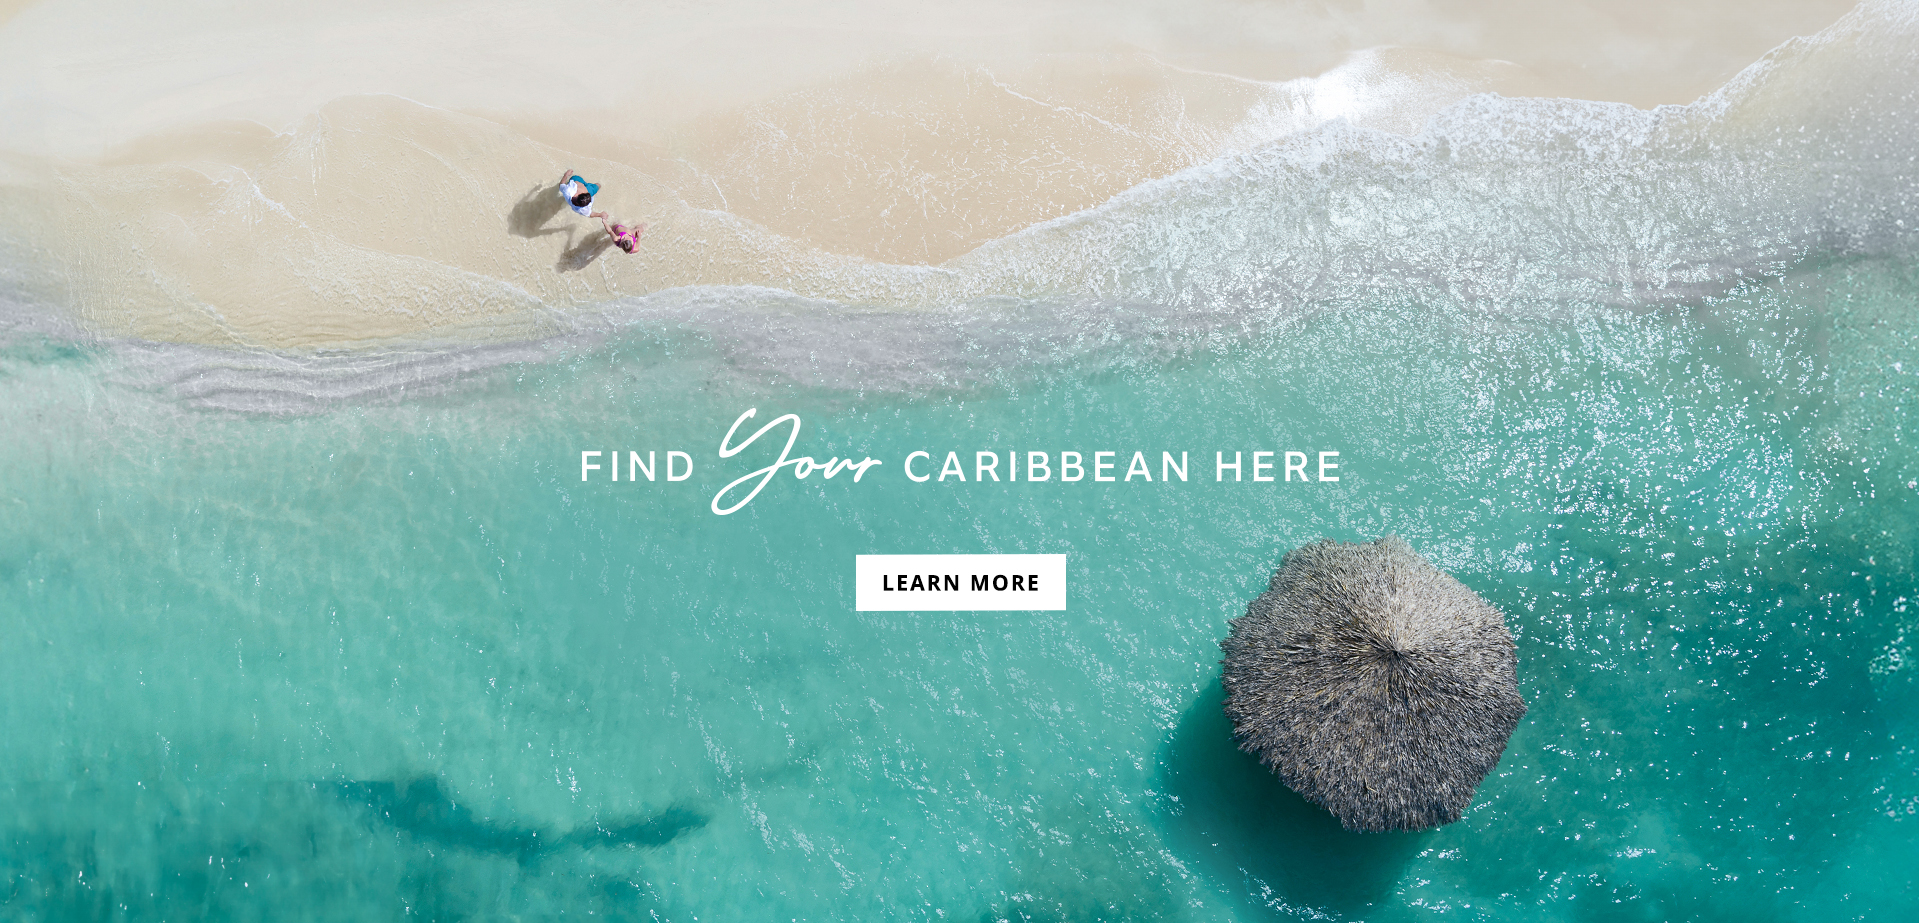 Find your Caribbean here